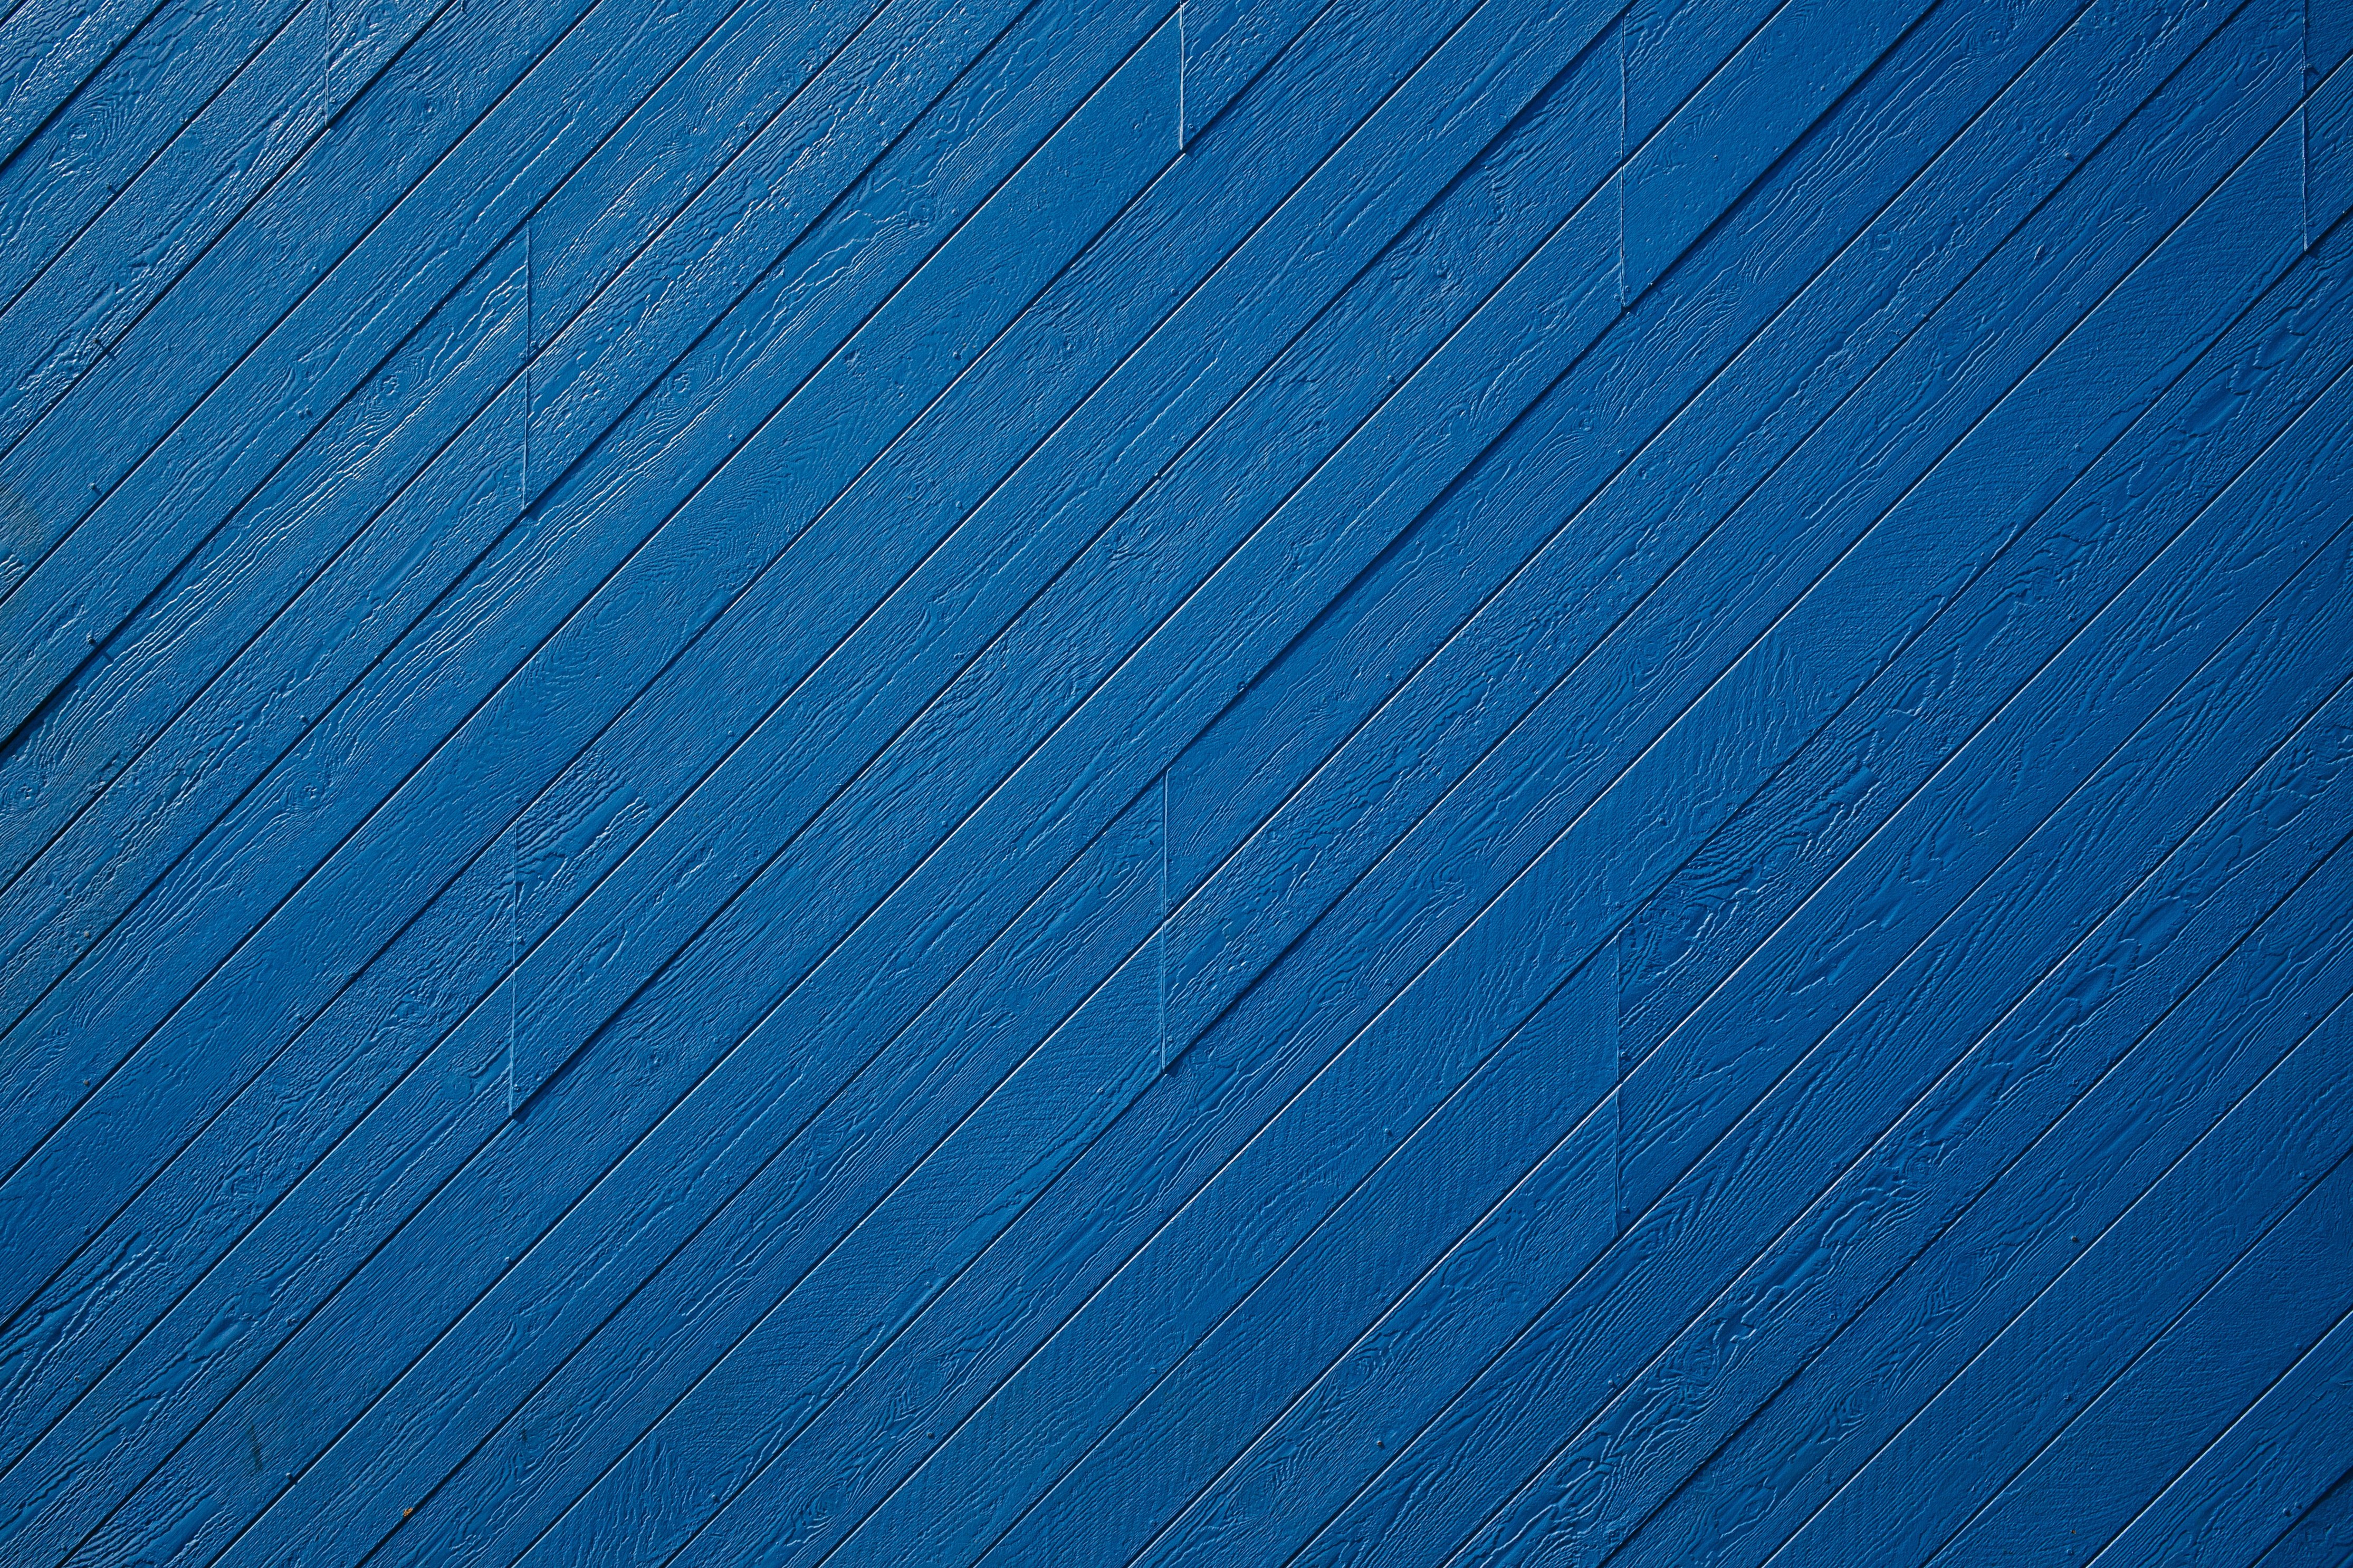 textures, obliquely, blue, wood, wooden, texture, paint, wall Free Background